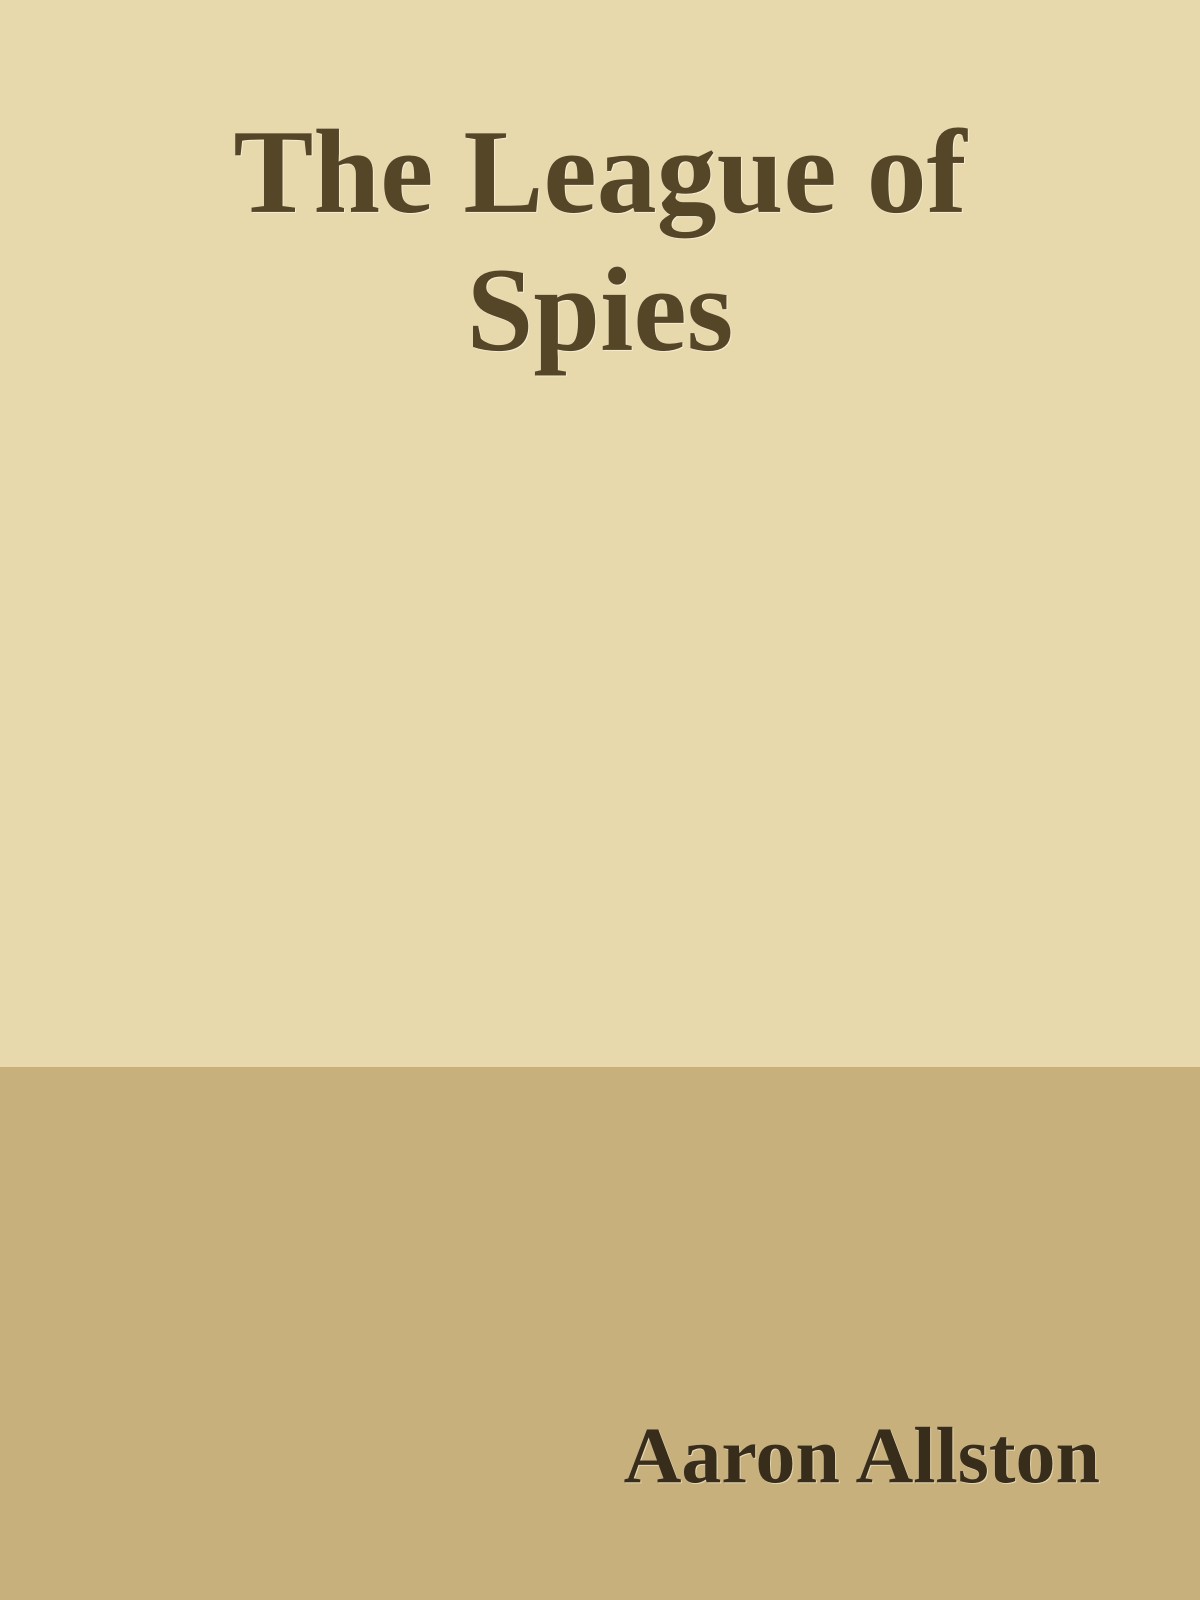 The League of Spies